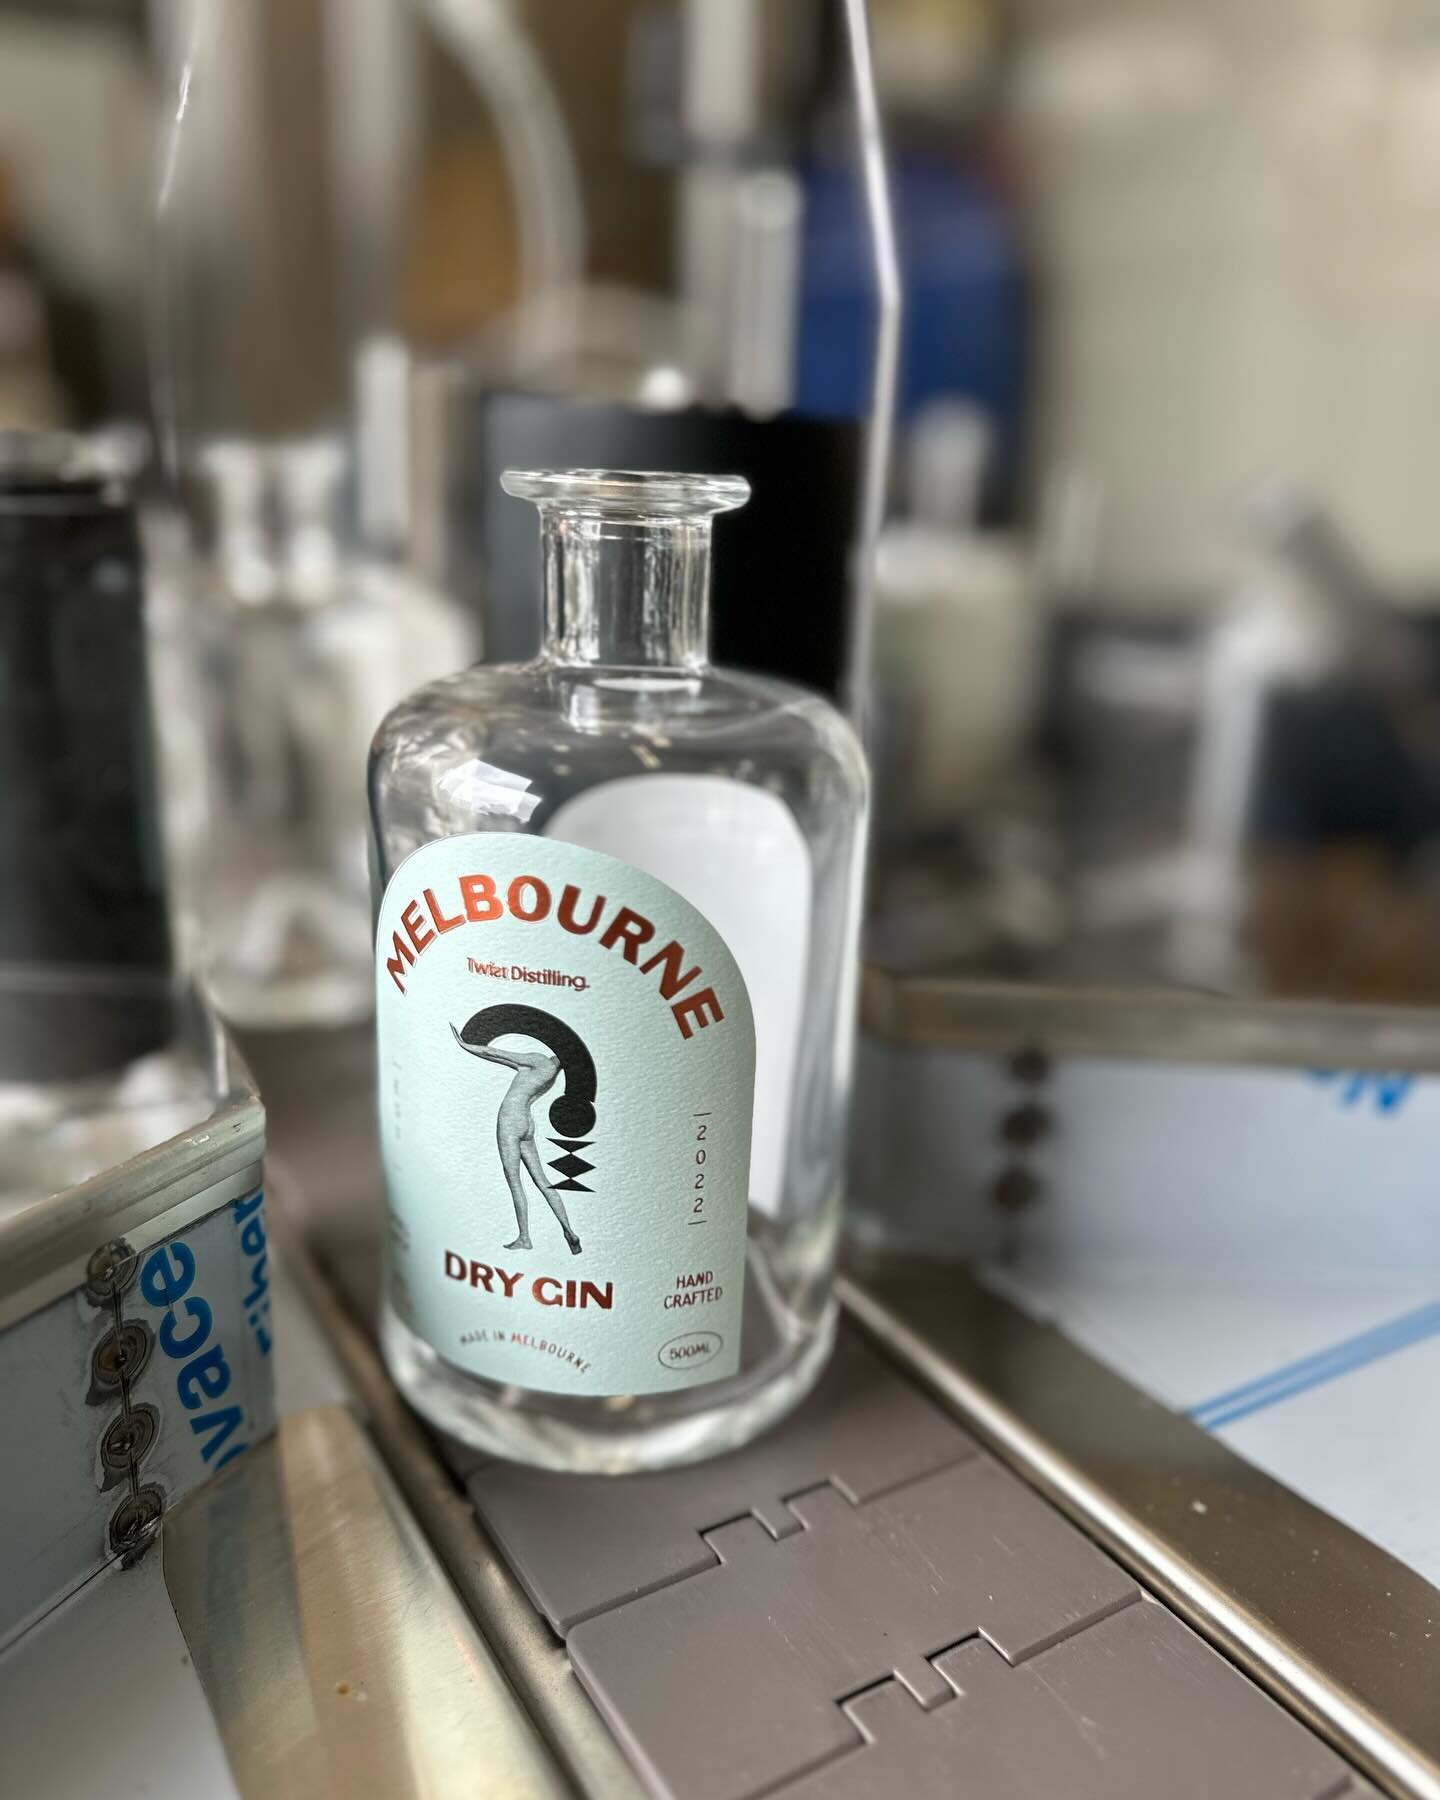 Hot off the production line&hellip;..Melbourne Dry Gin has arrived